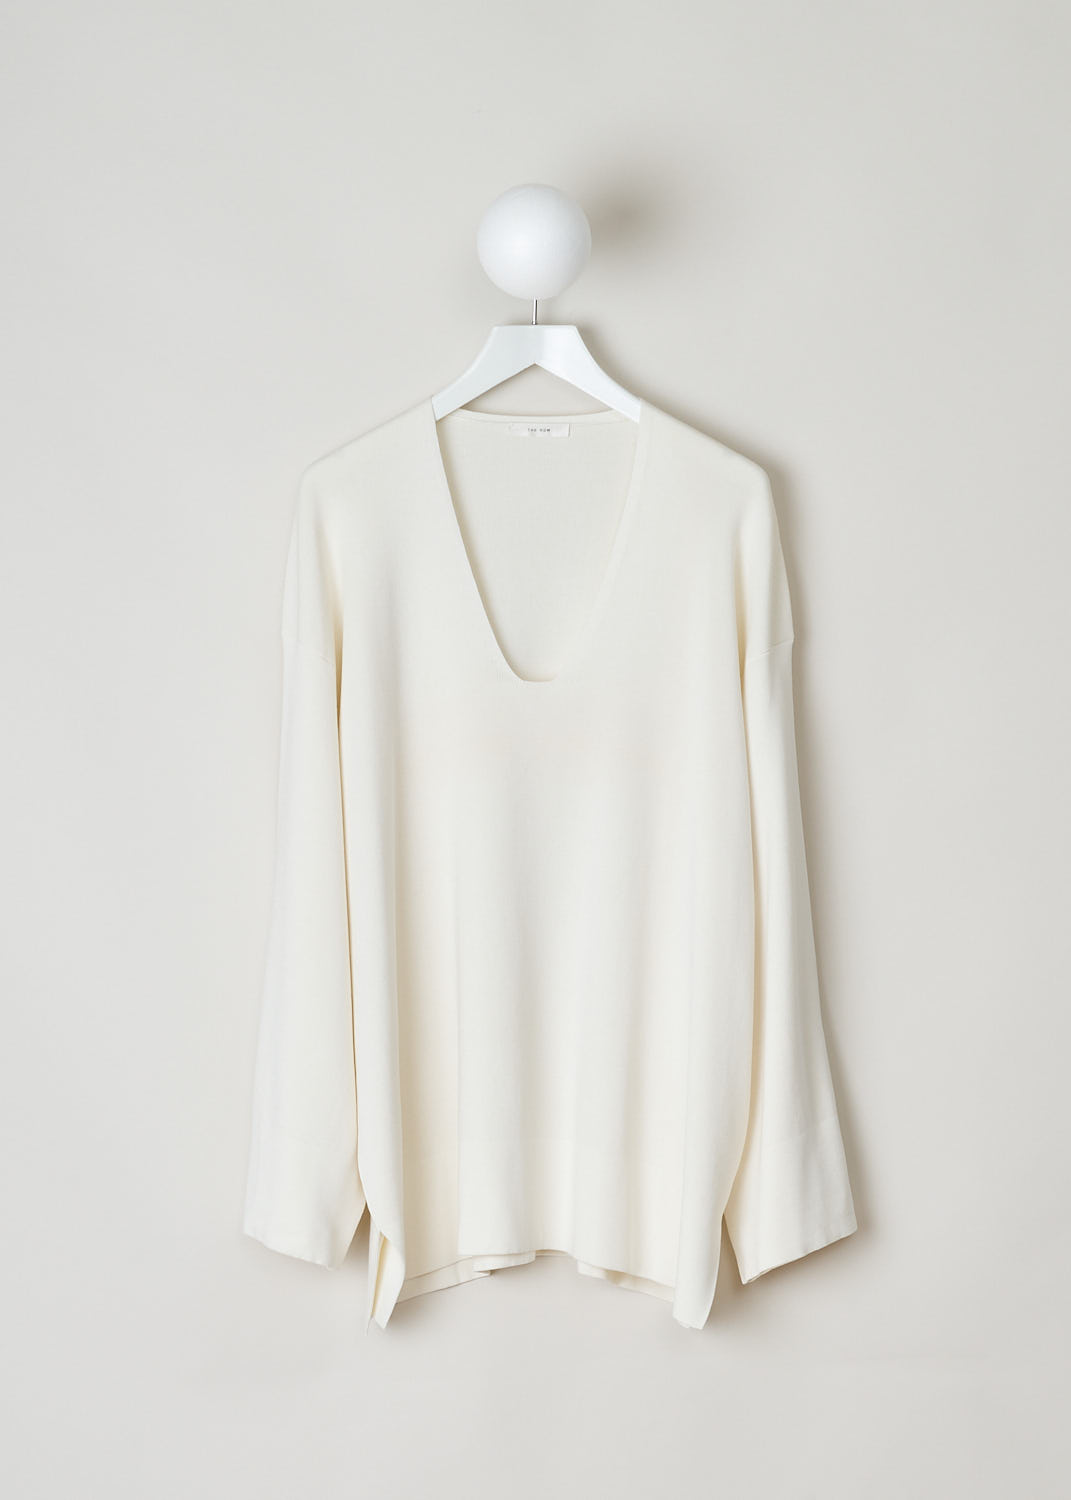 THE ROW, OFF-WHITE SWEATER, LESLI_TOP_3856Y252_IVORY, White, Top, This silk-blend top in off-white has a deep, rounded off V-neckline and slightly flared sleeves. The top has a broad hemline with small slits. The top has a wider silhouette.
